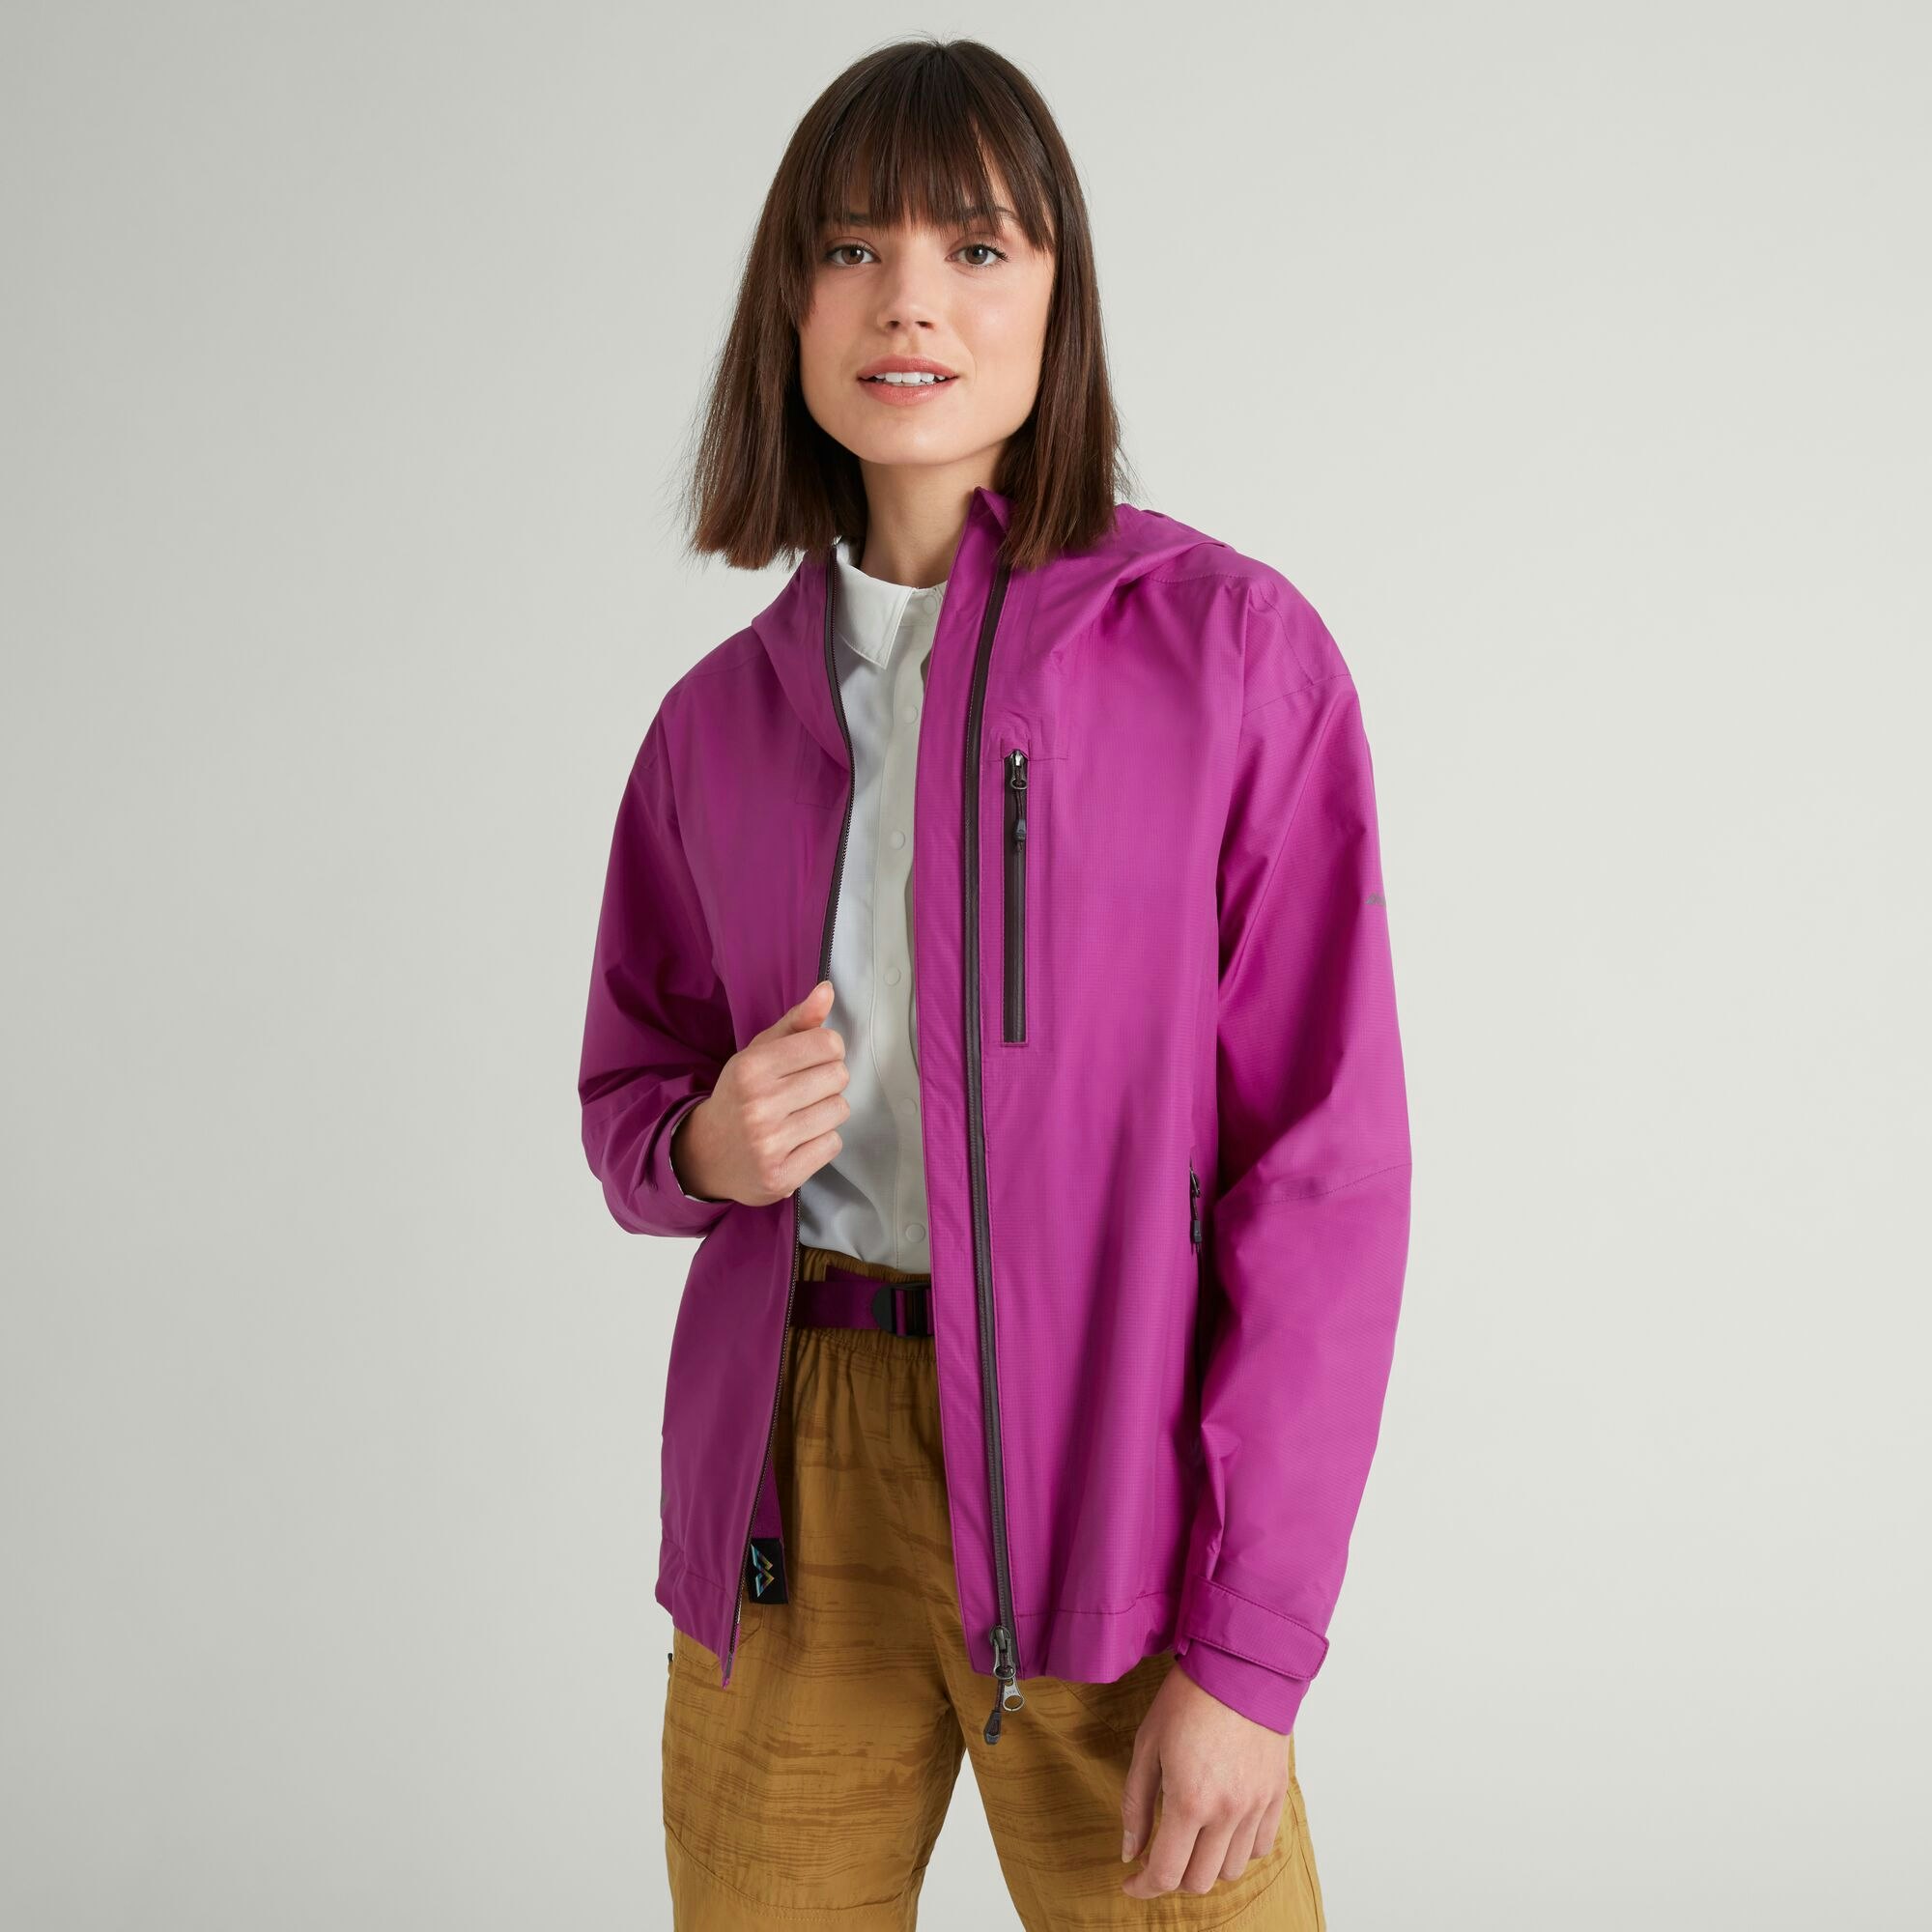 5 Best Packable Rain Jackets For Trips (That Are Cute AND Affordable!)